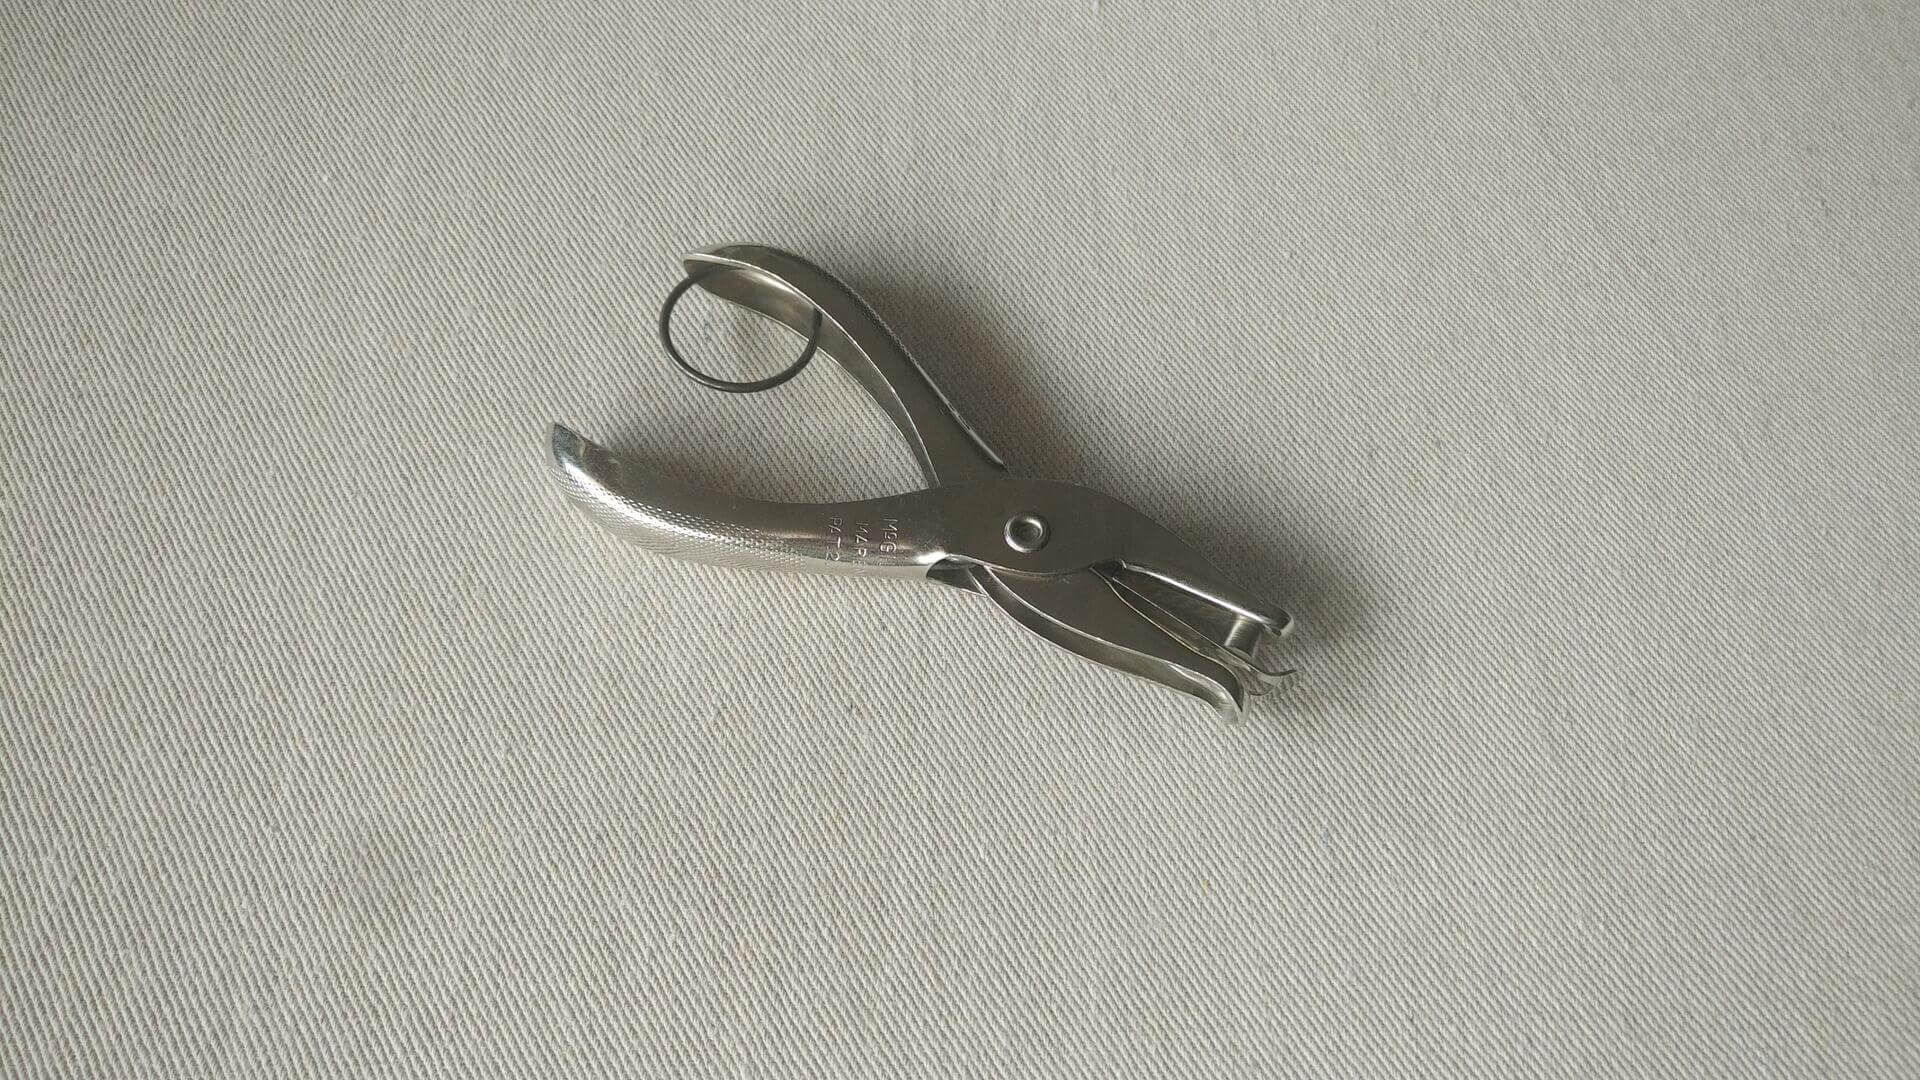 Vintage Gem handheld ticket & single hole paper punch by McGill Metal Products Co Marengo, IL. Antique made in USA office tools and stationery collectible.